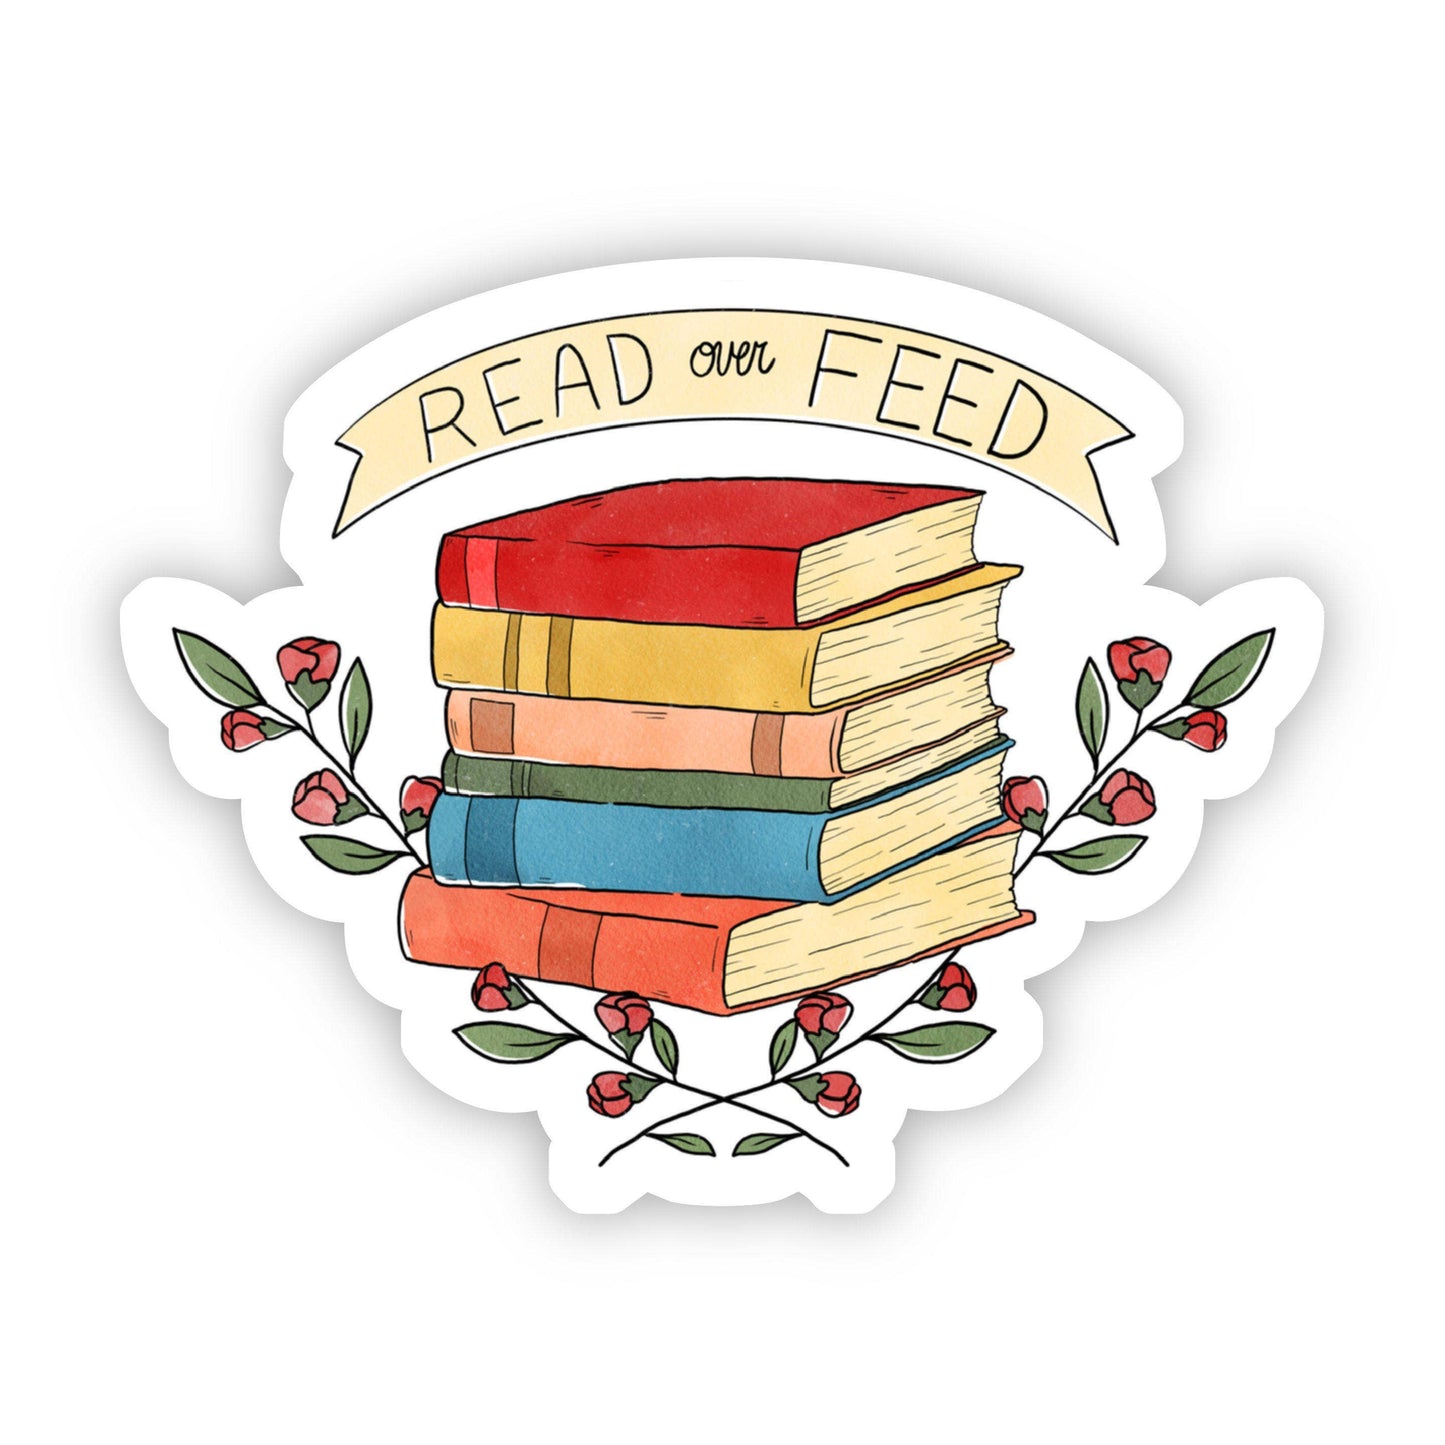 Read Over Feed Book Sticker